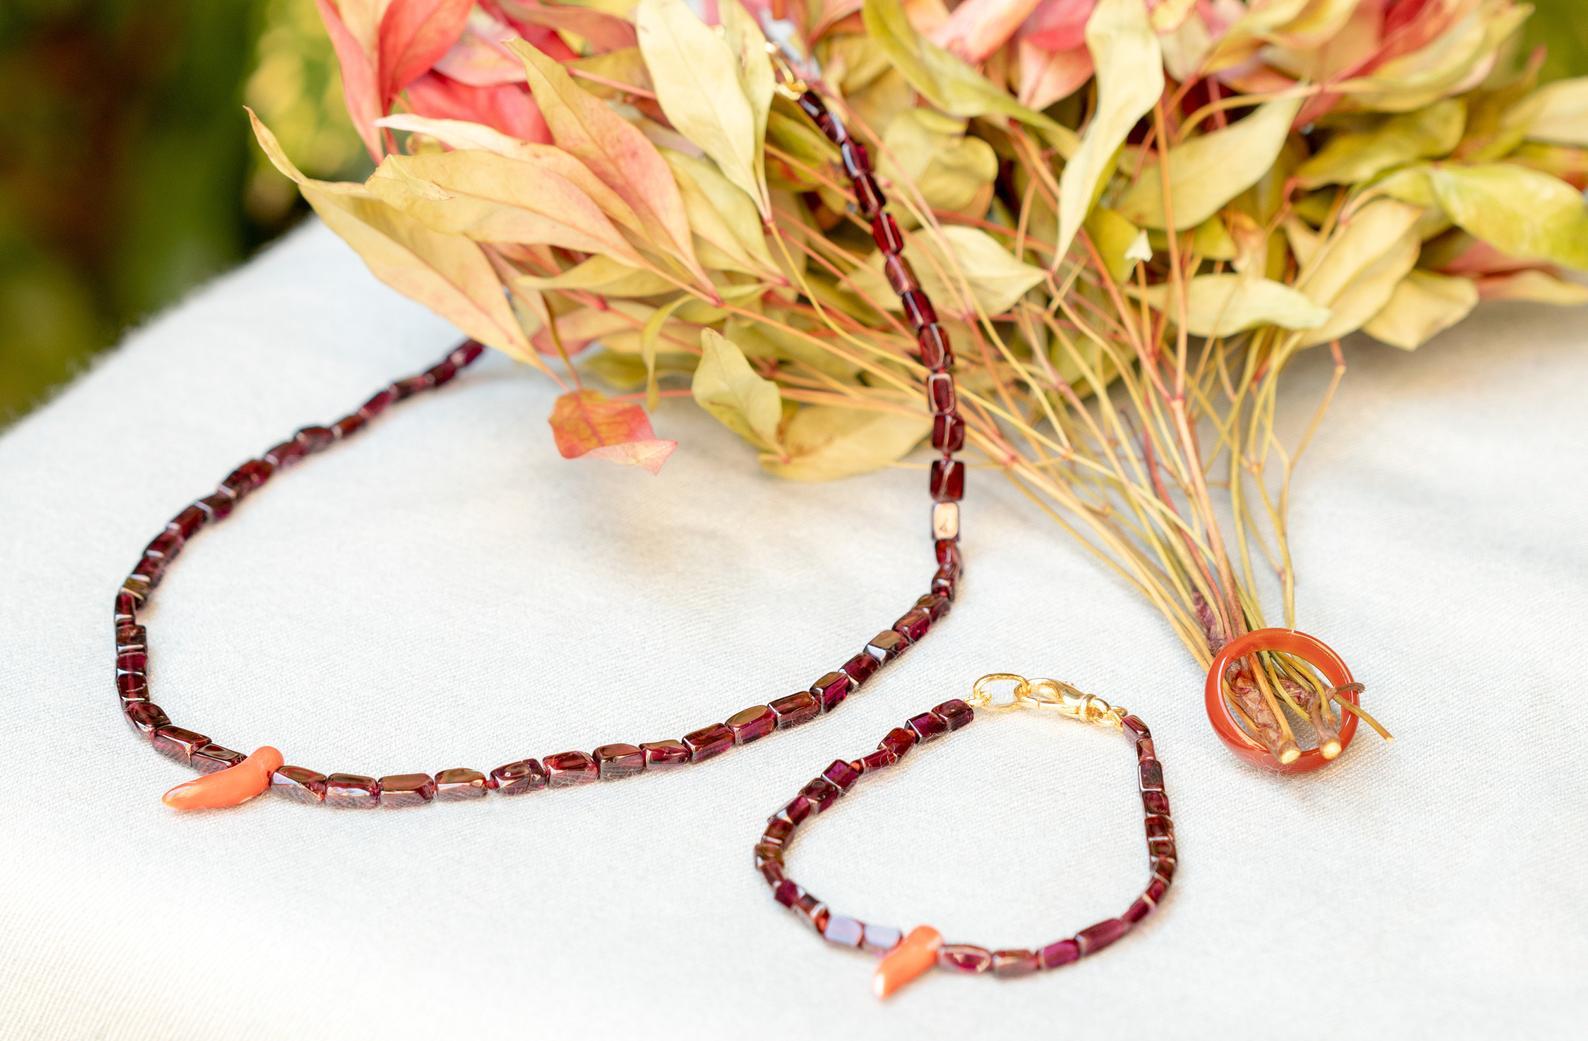 A fresh design made with rectangle shaped violet garnet beads. Immerse yourself in the beauty of this uniquely designed necklace and bracelet with natural stones full of life and color. A hawaiian inspirational jewel which will match any beach